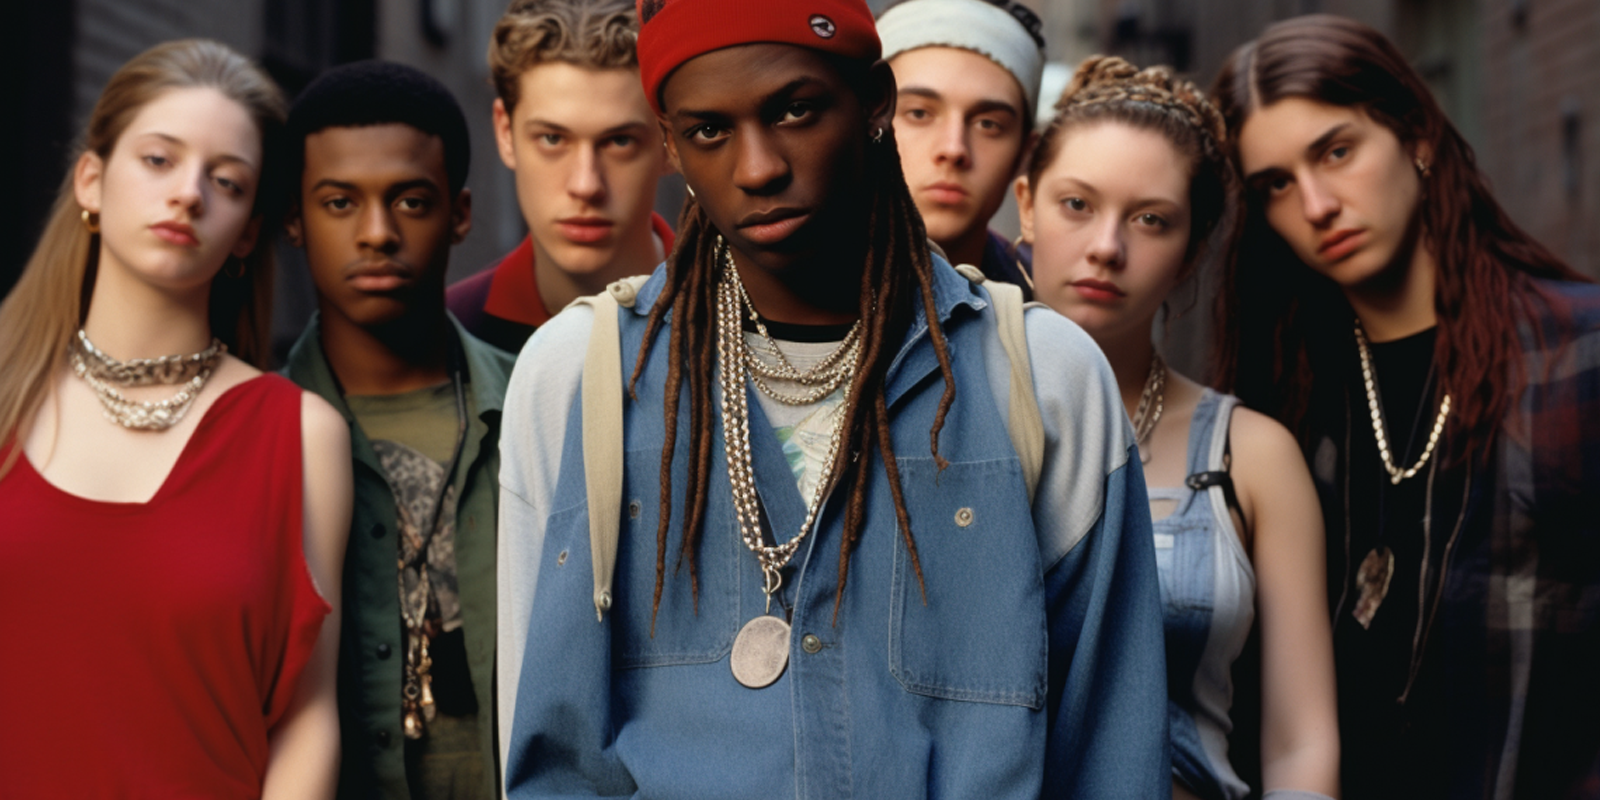 Group of teens in the 1990s wearing jewelry feature image